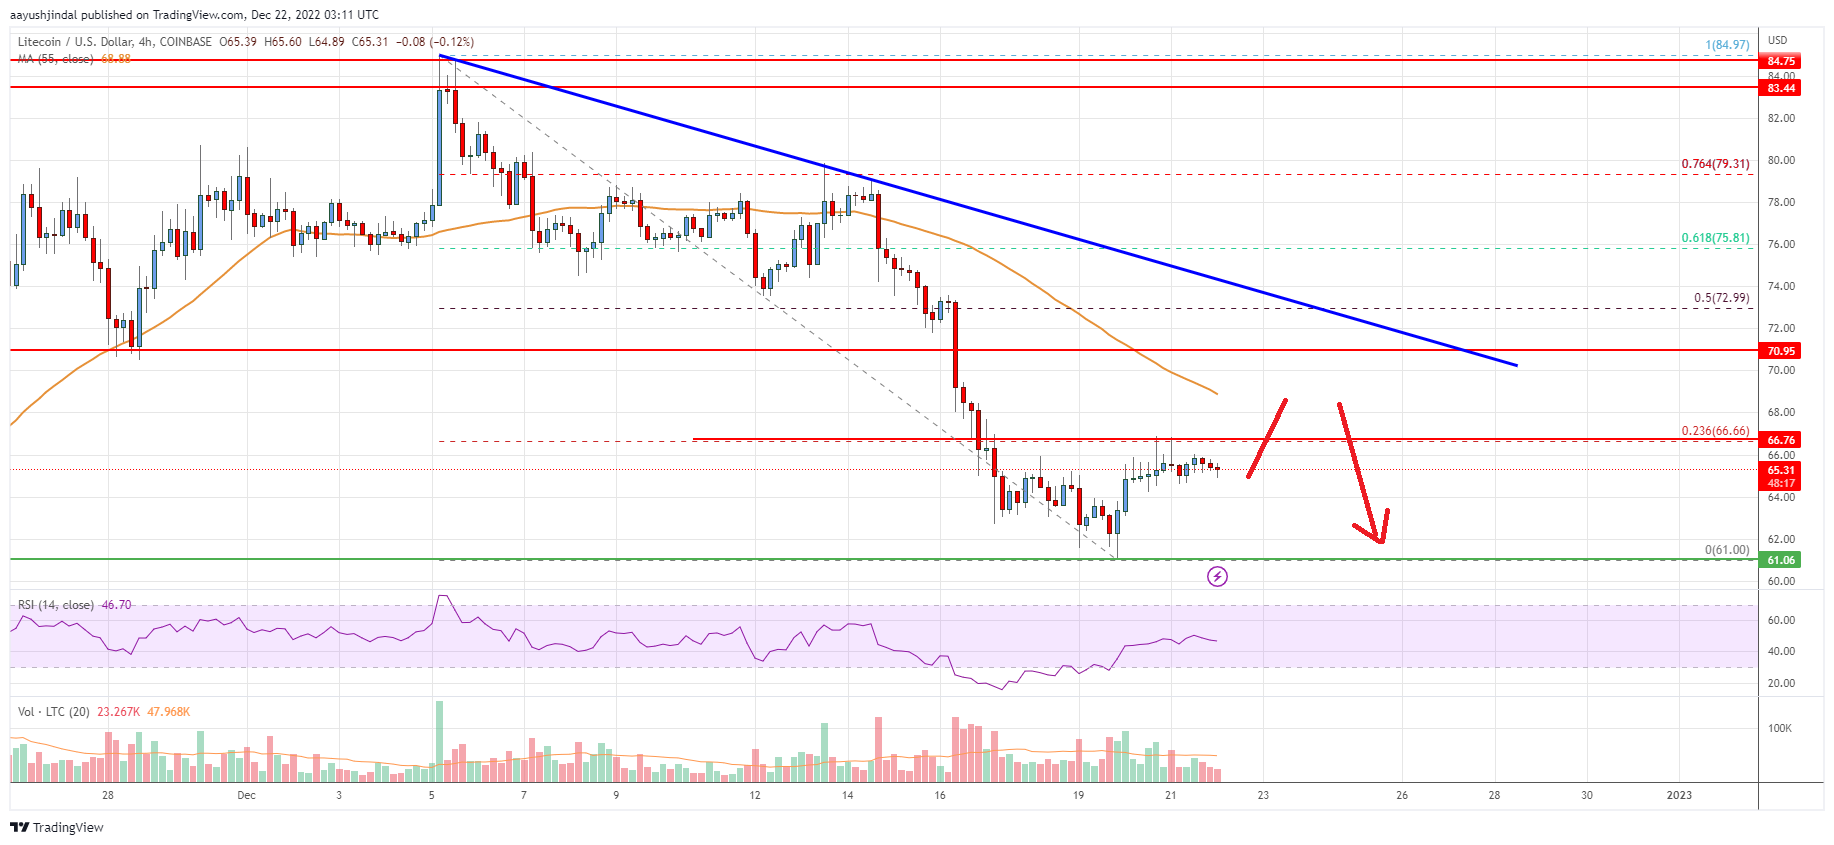 Litecoin (LTC) Price Analysis: Upsides Could Be Capped Near $70